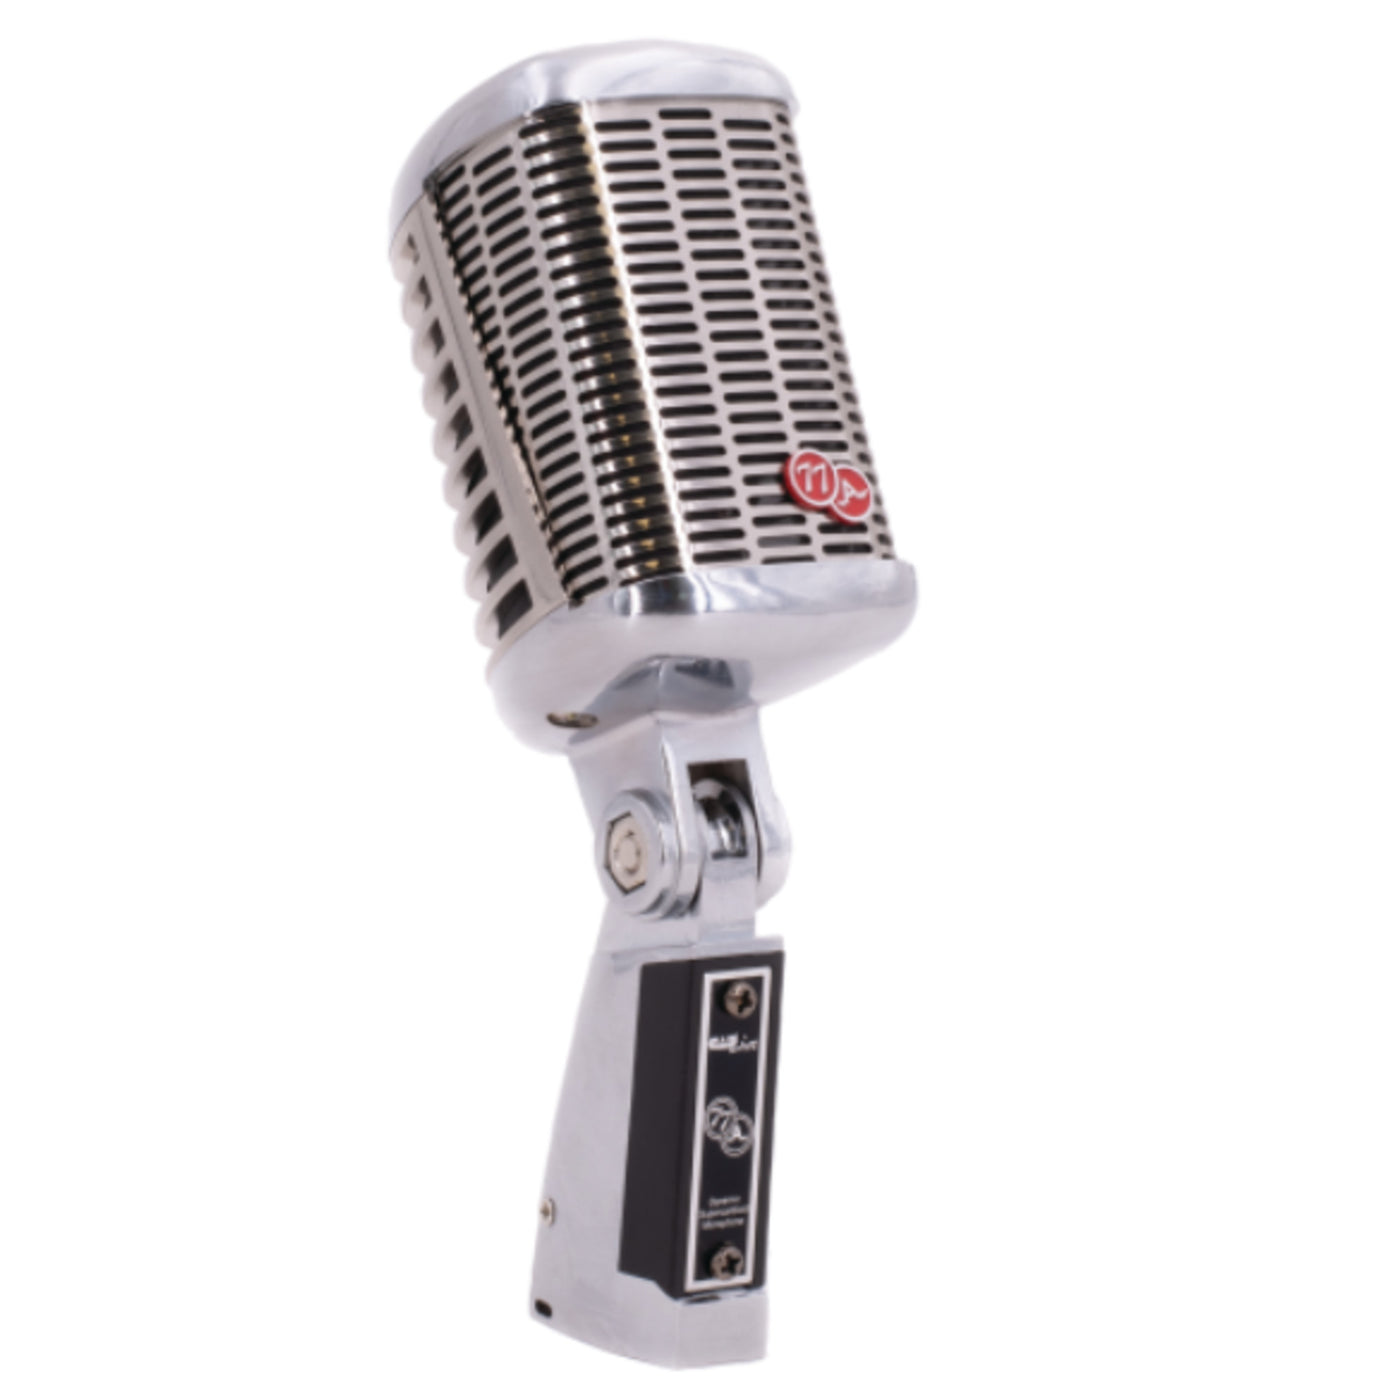 CAD Audio A77USB Large Diaphragm SuperCardioid Dynamic Side Address Vintage Microphone with USB Connection (A77USB)